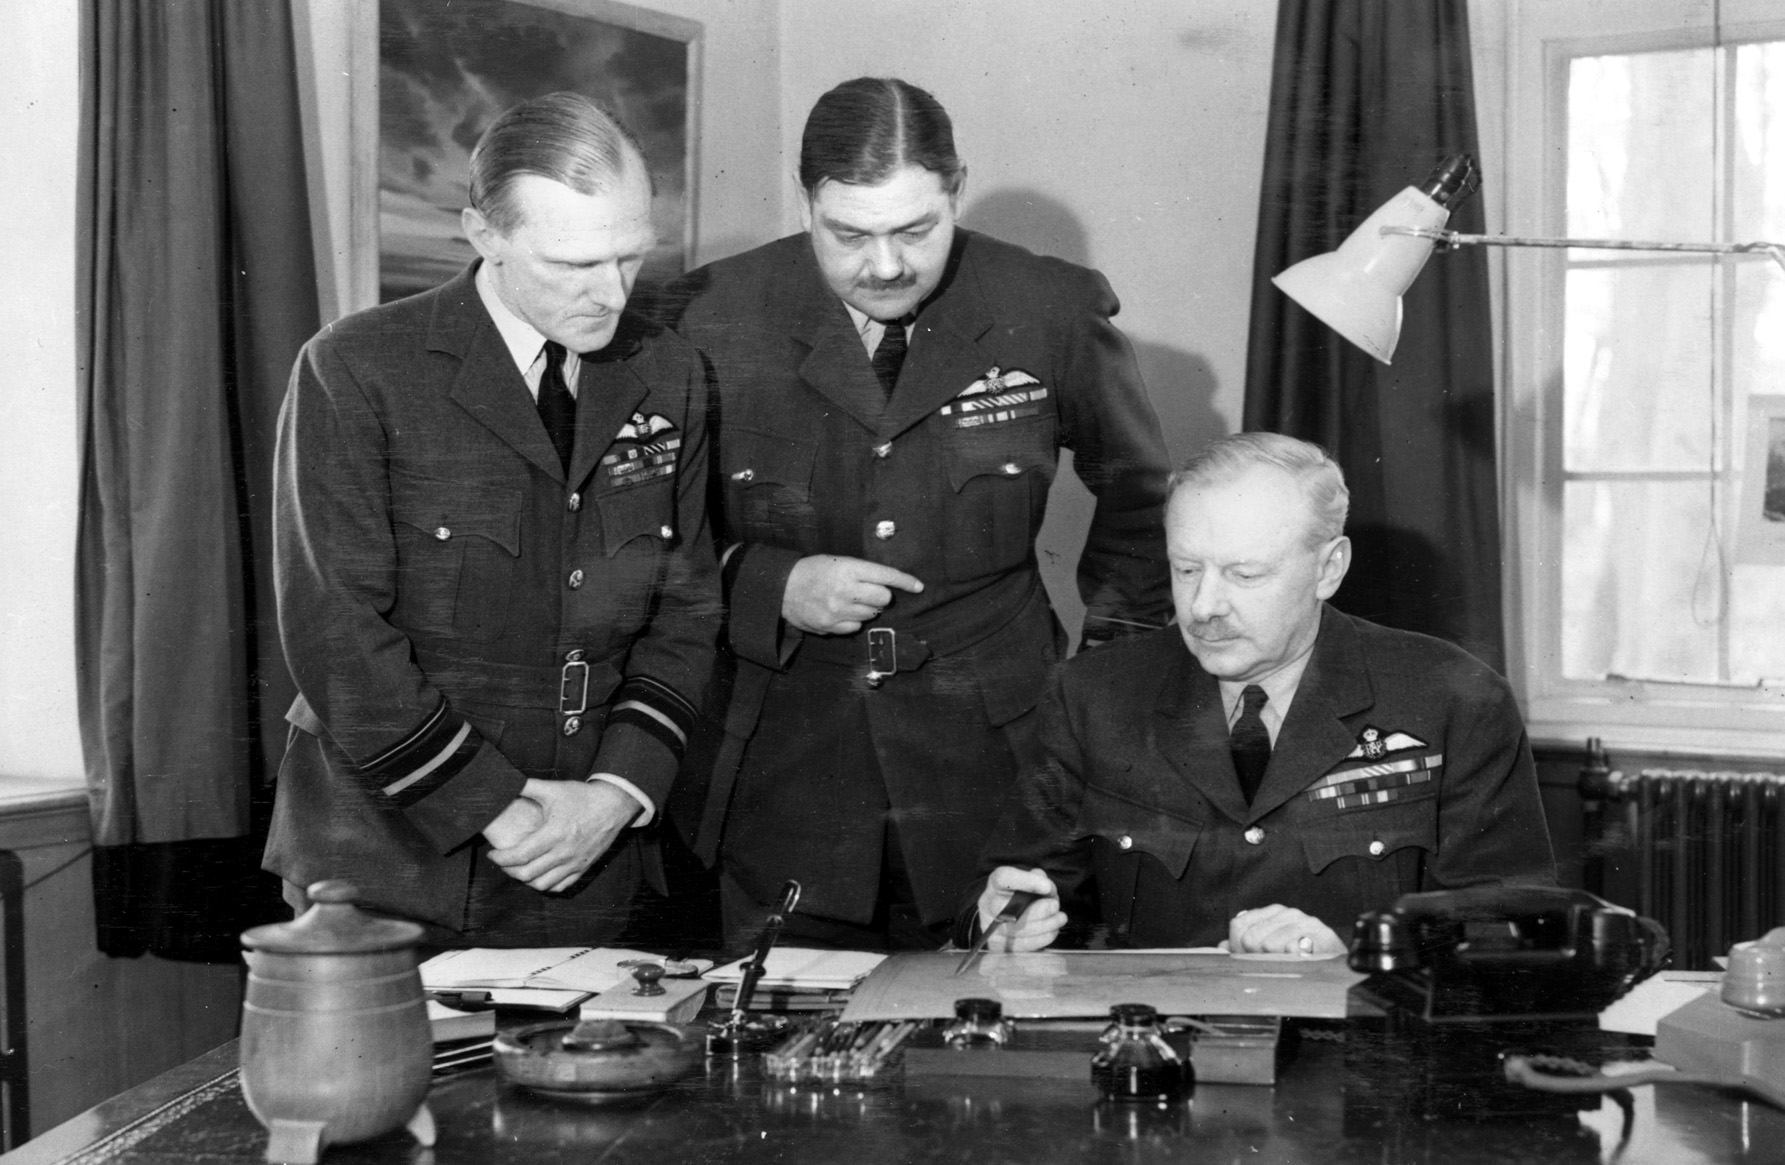 Sir Arthur “Bomber” Harris (right) with members of his RAF Bomber Command staff. Harris believed strongly that aerial bombing alone would save Allied lives, make invasion unnecessary, and win the war. 